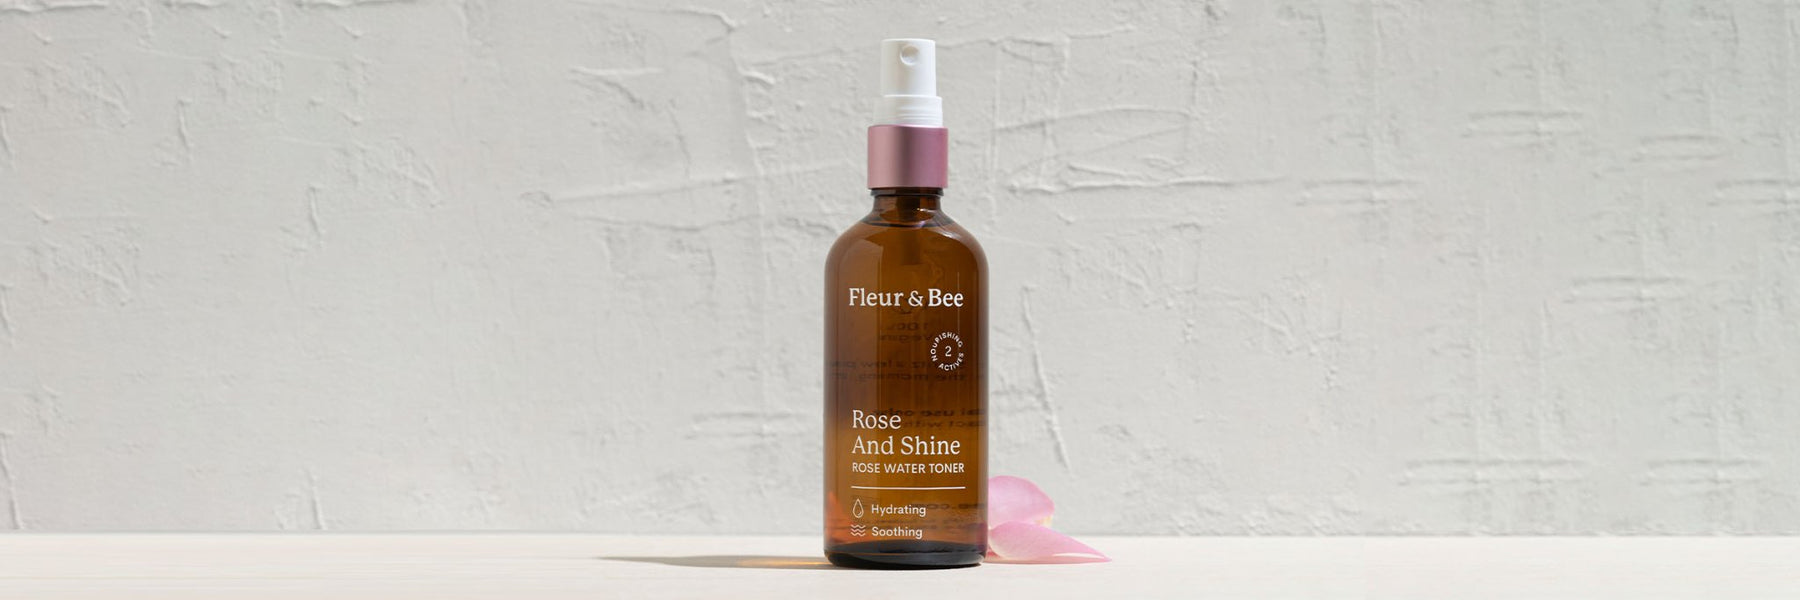 Rose and Shine: Natural Rose Water Toner by Fleur & Bee